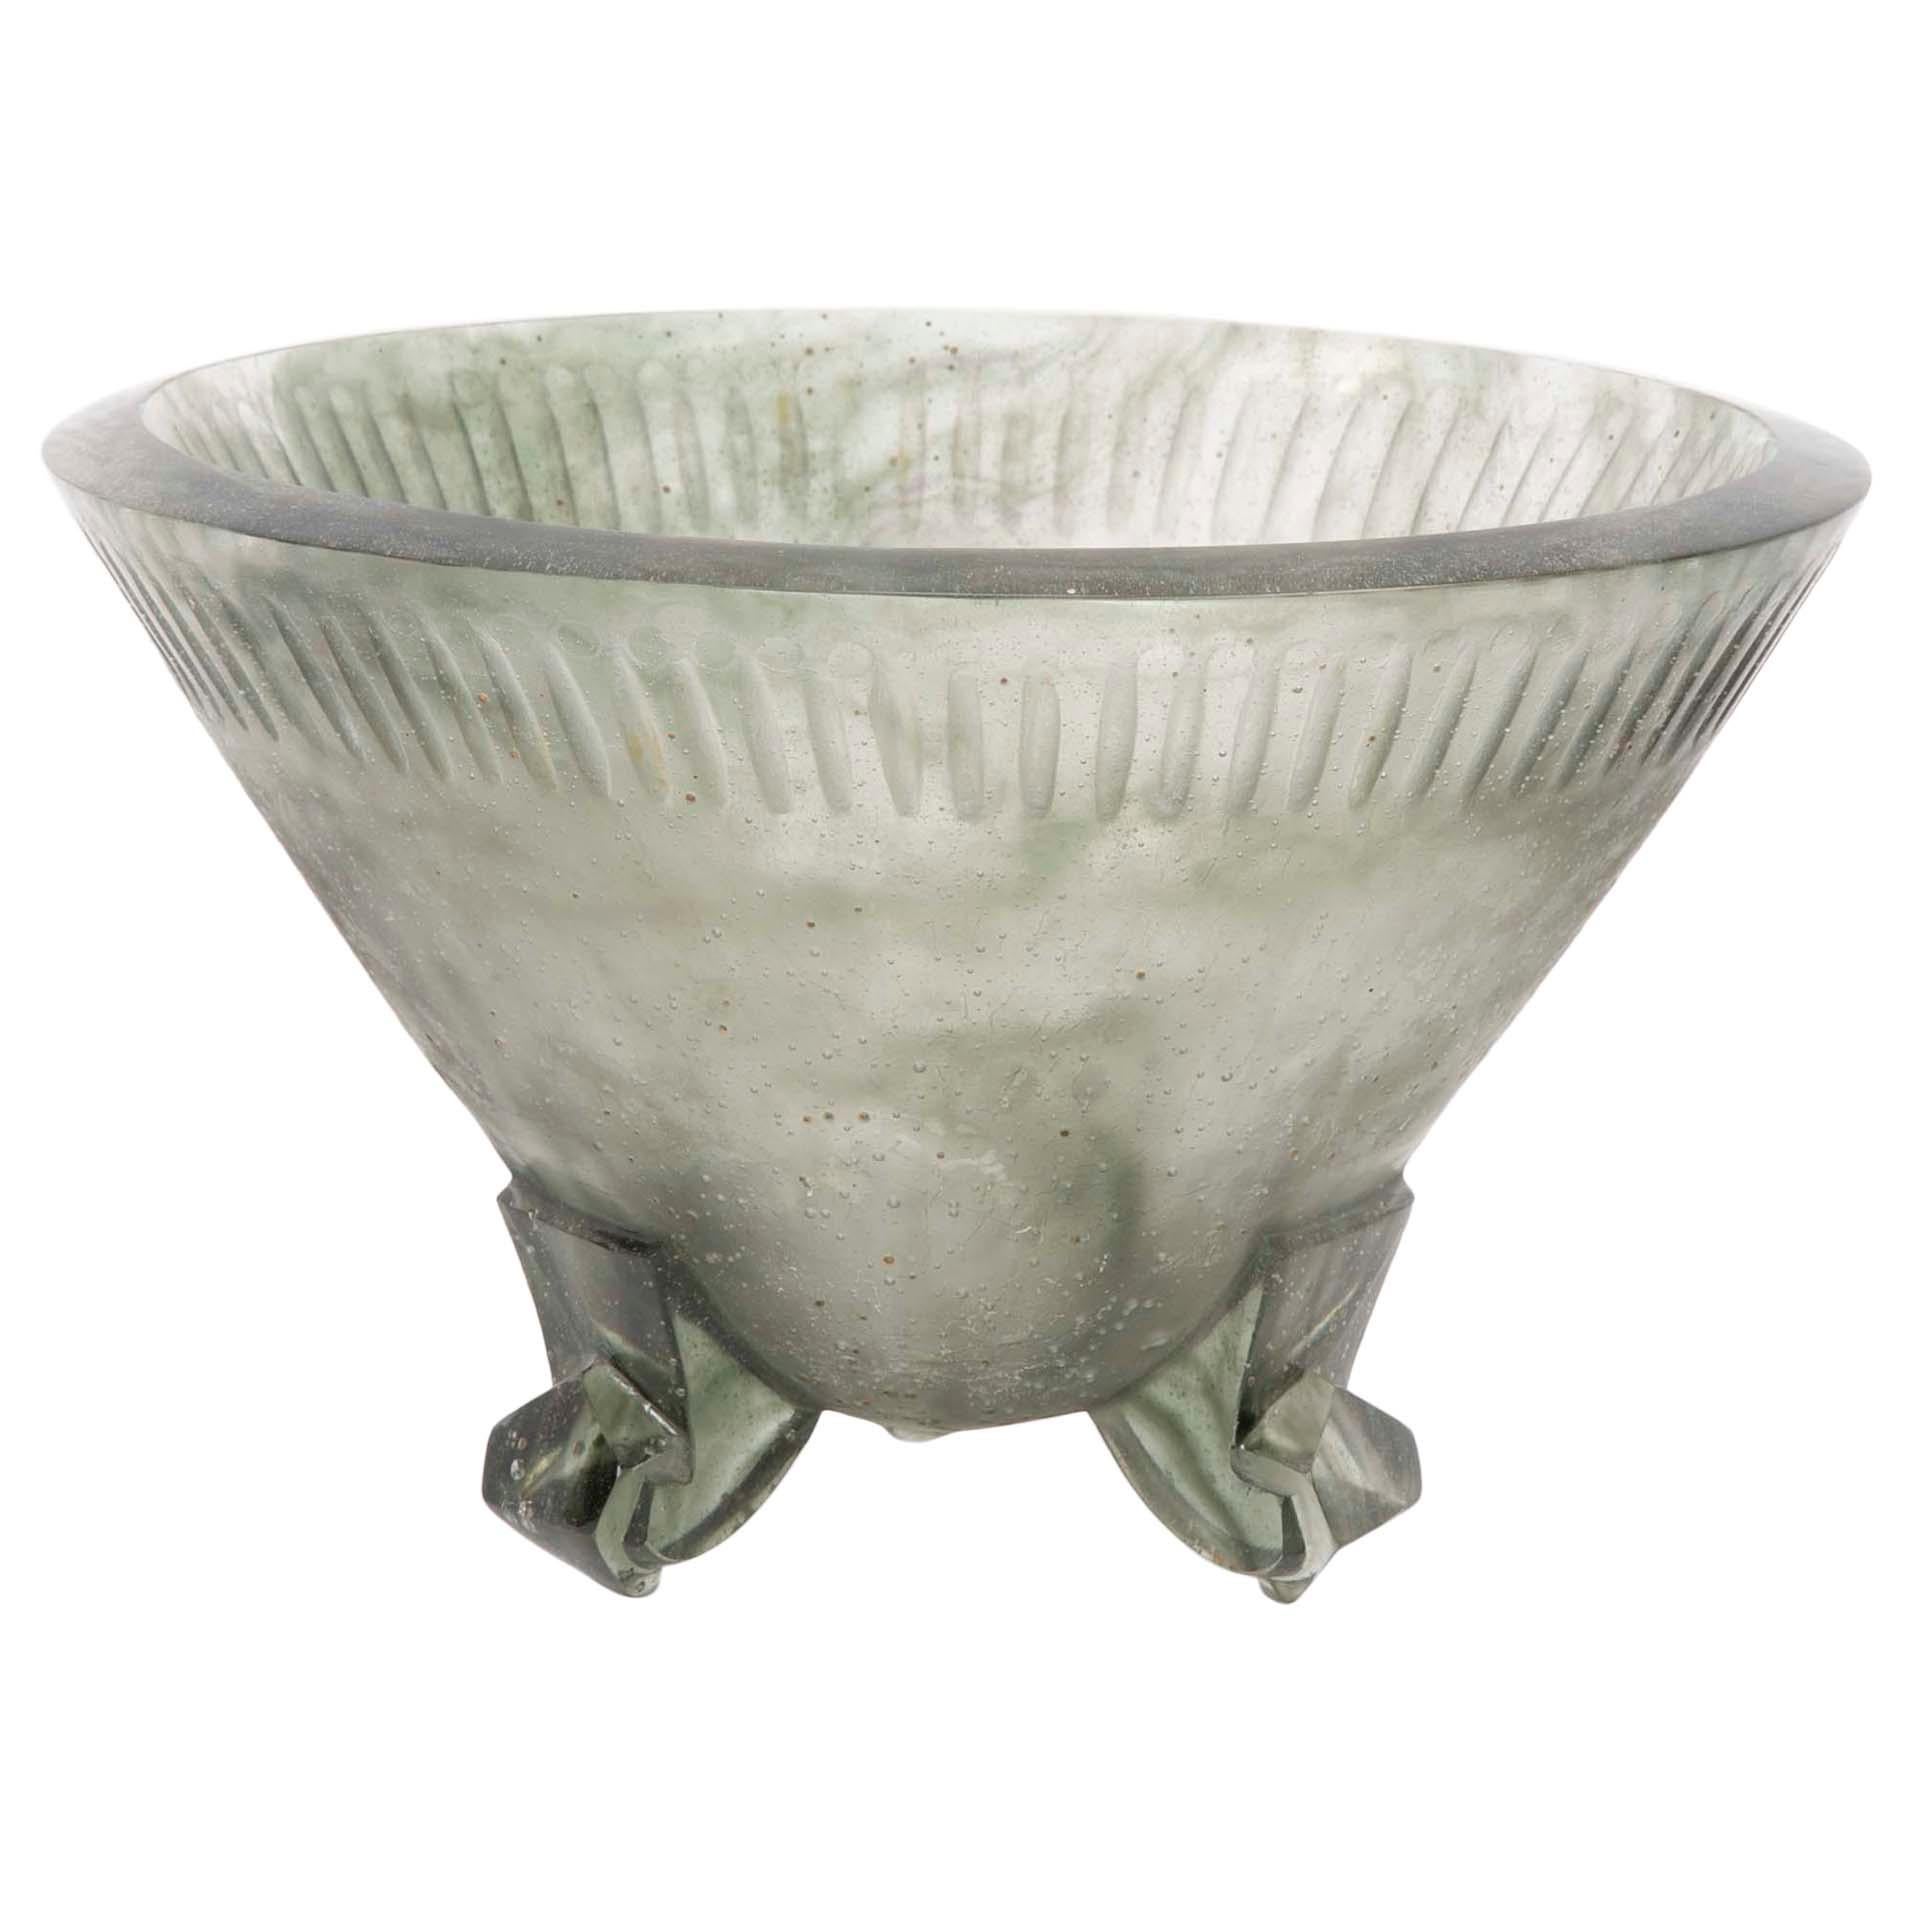 Large Smokey Grey Pate De Verre Glass Footed Bowl by Francois Decorchemont